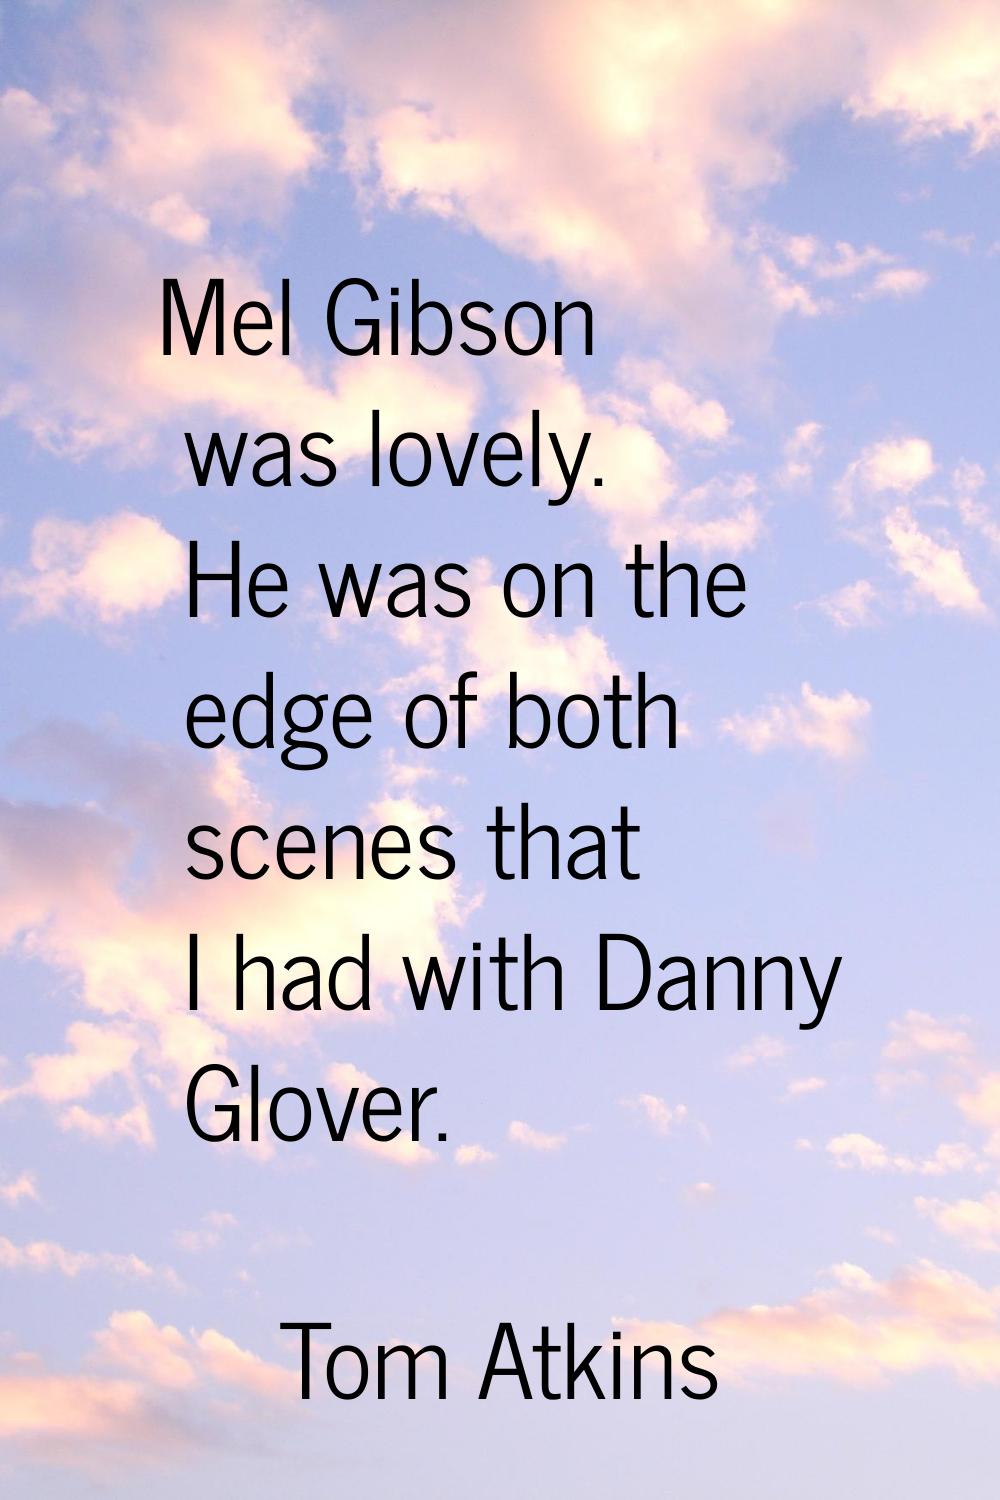 Mel Gibson was lovely. He was on the edge of both scenes that I had with Danny Glover.